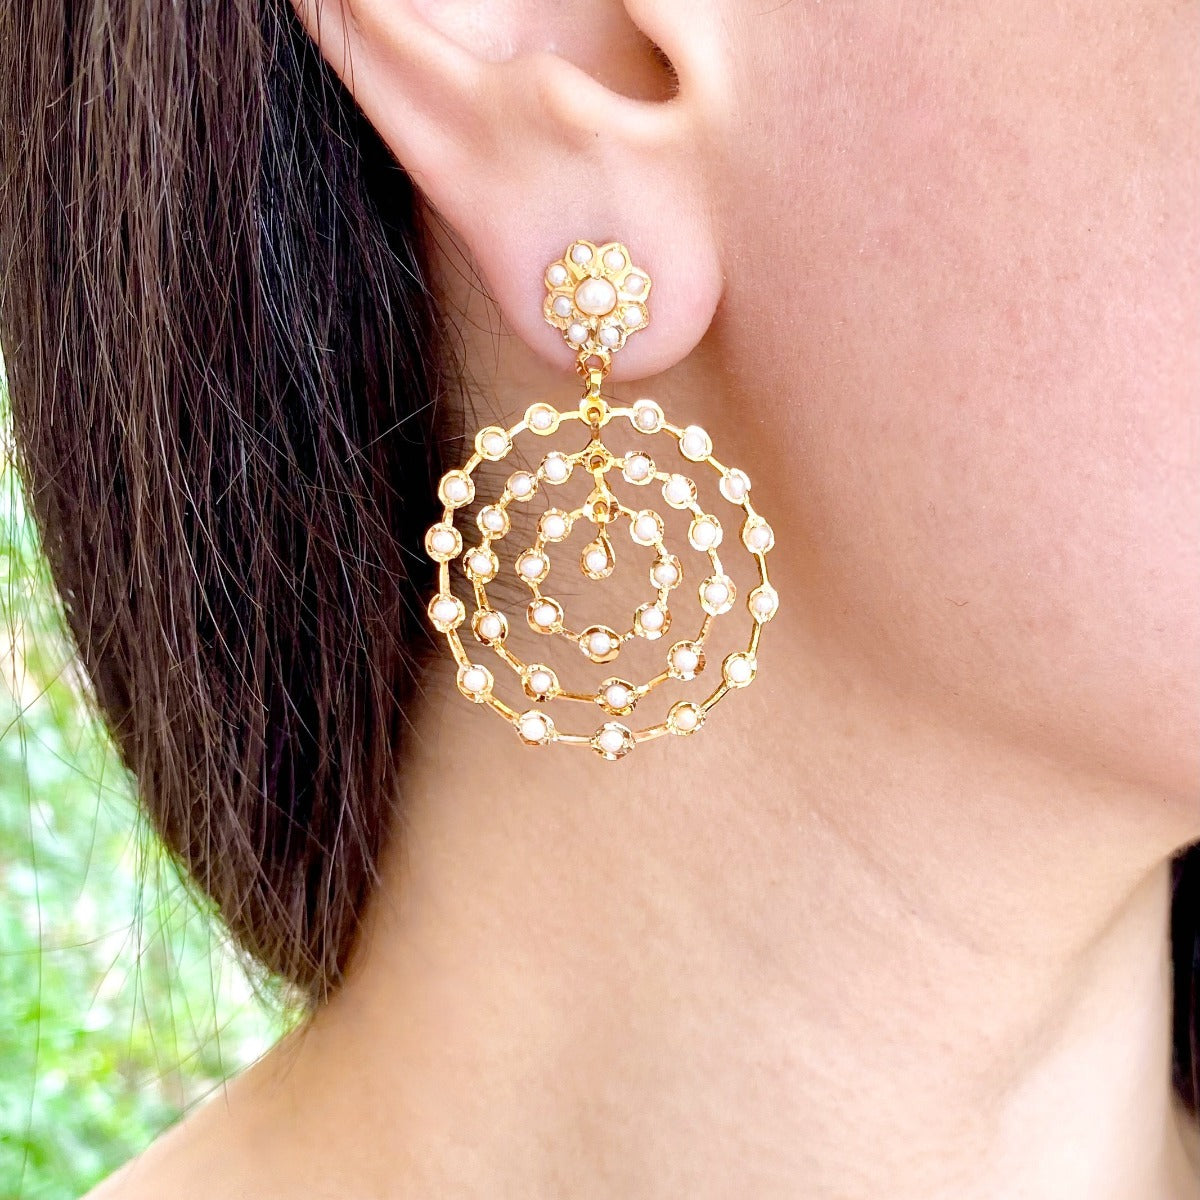 22k gold earrings with pearls